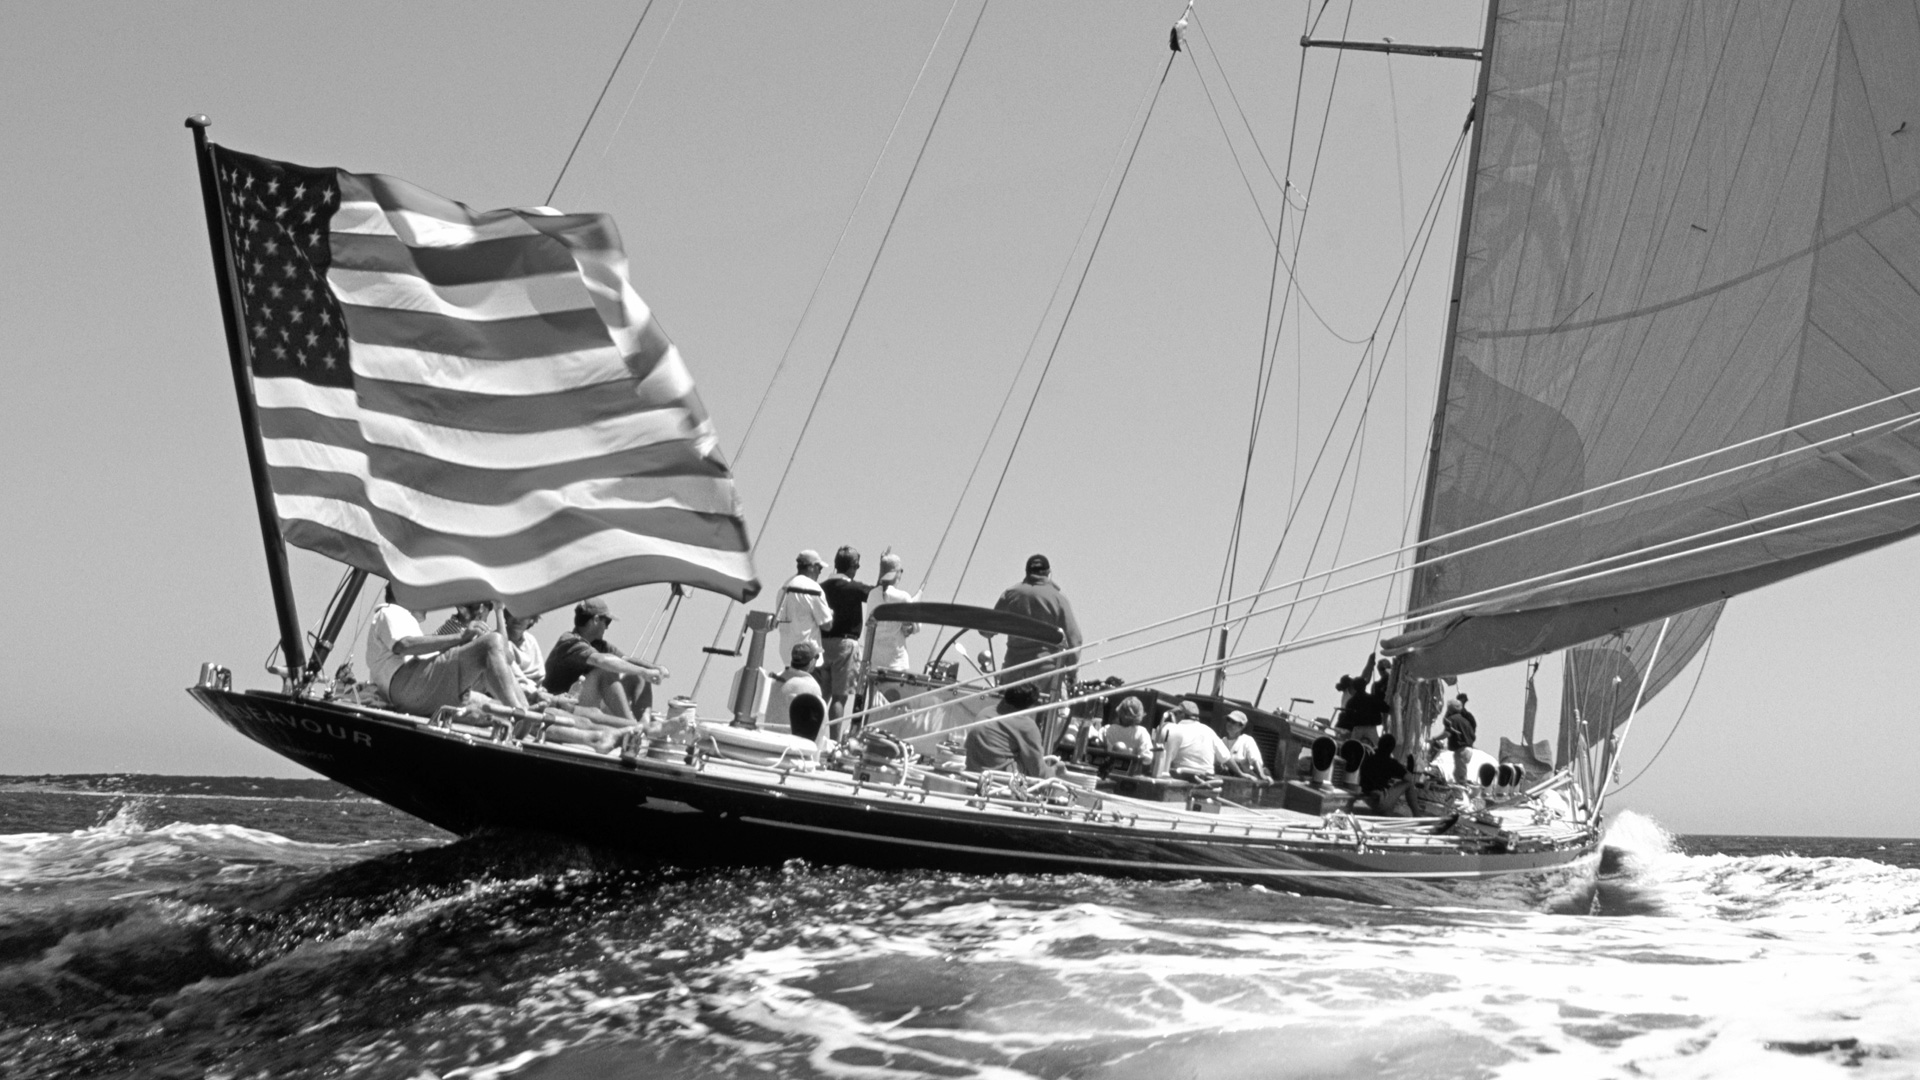 fan pier sail boat racing with american flag in black and white